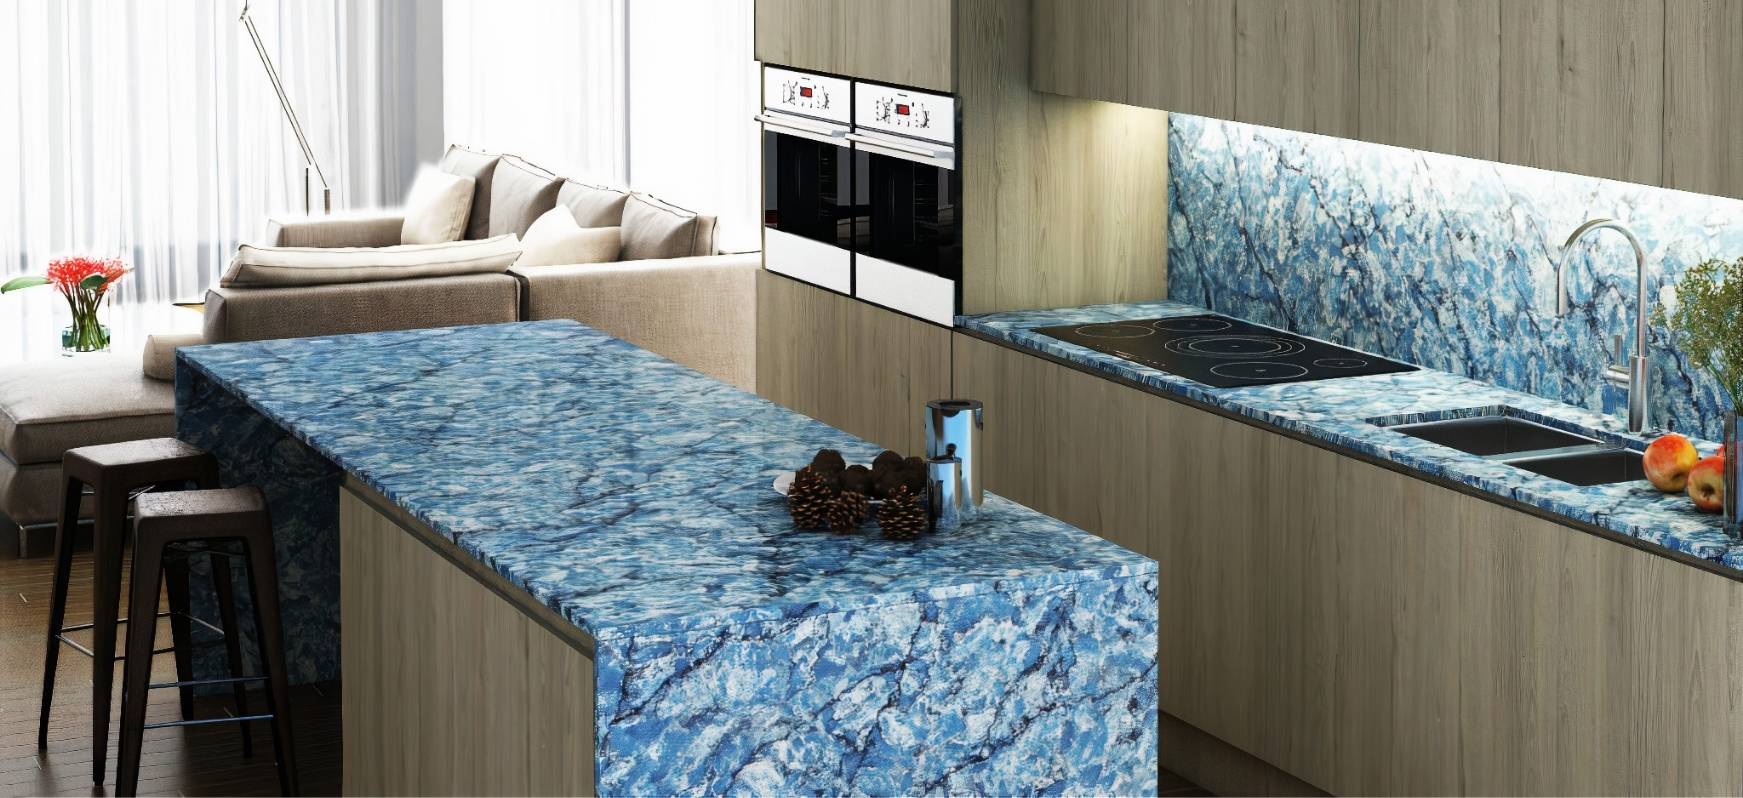 Tidewater Blue Countertops With Waterfall Panel and Full Height Backsplash